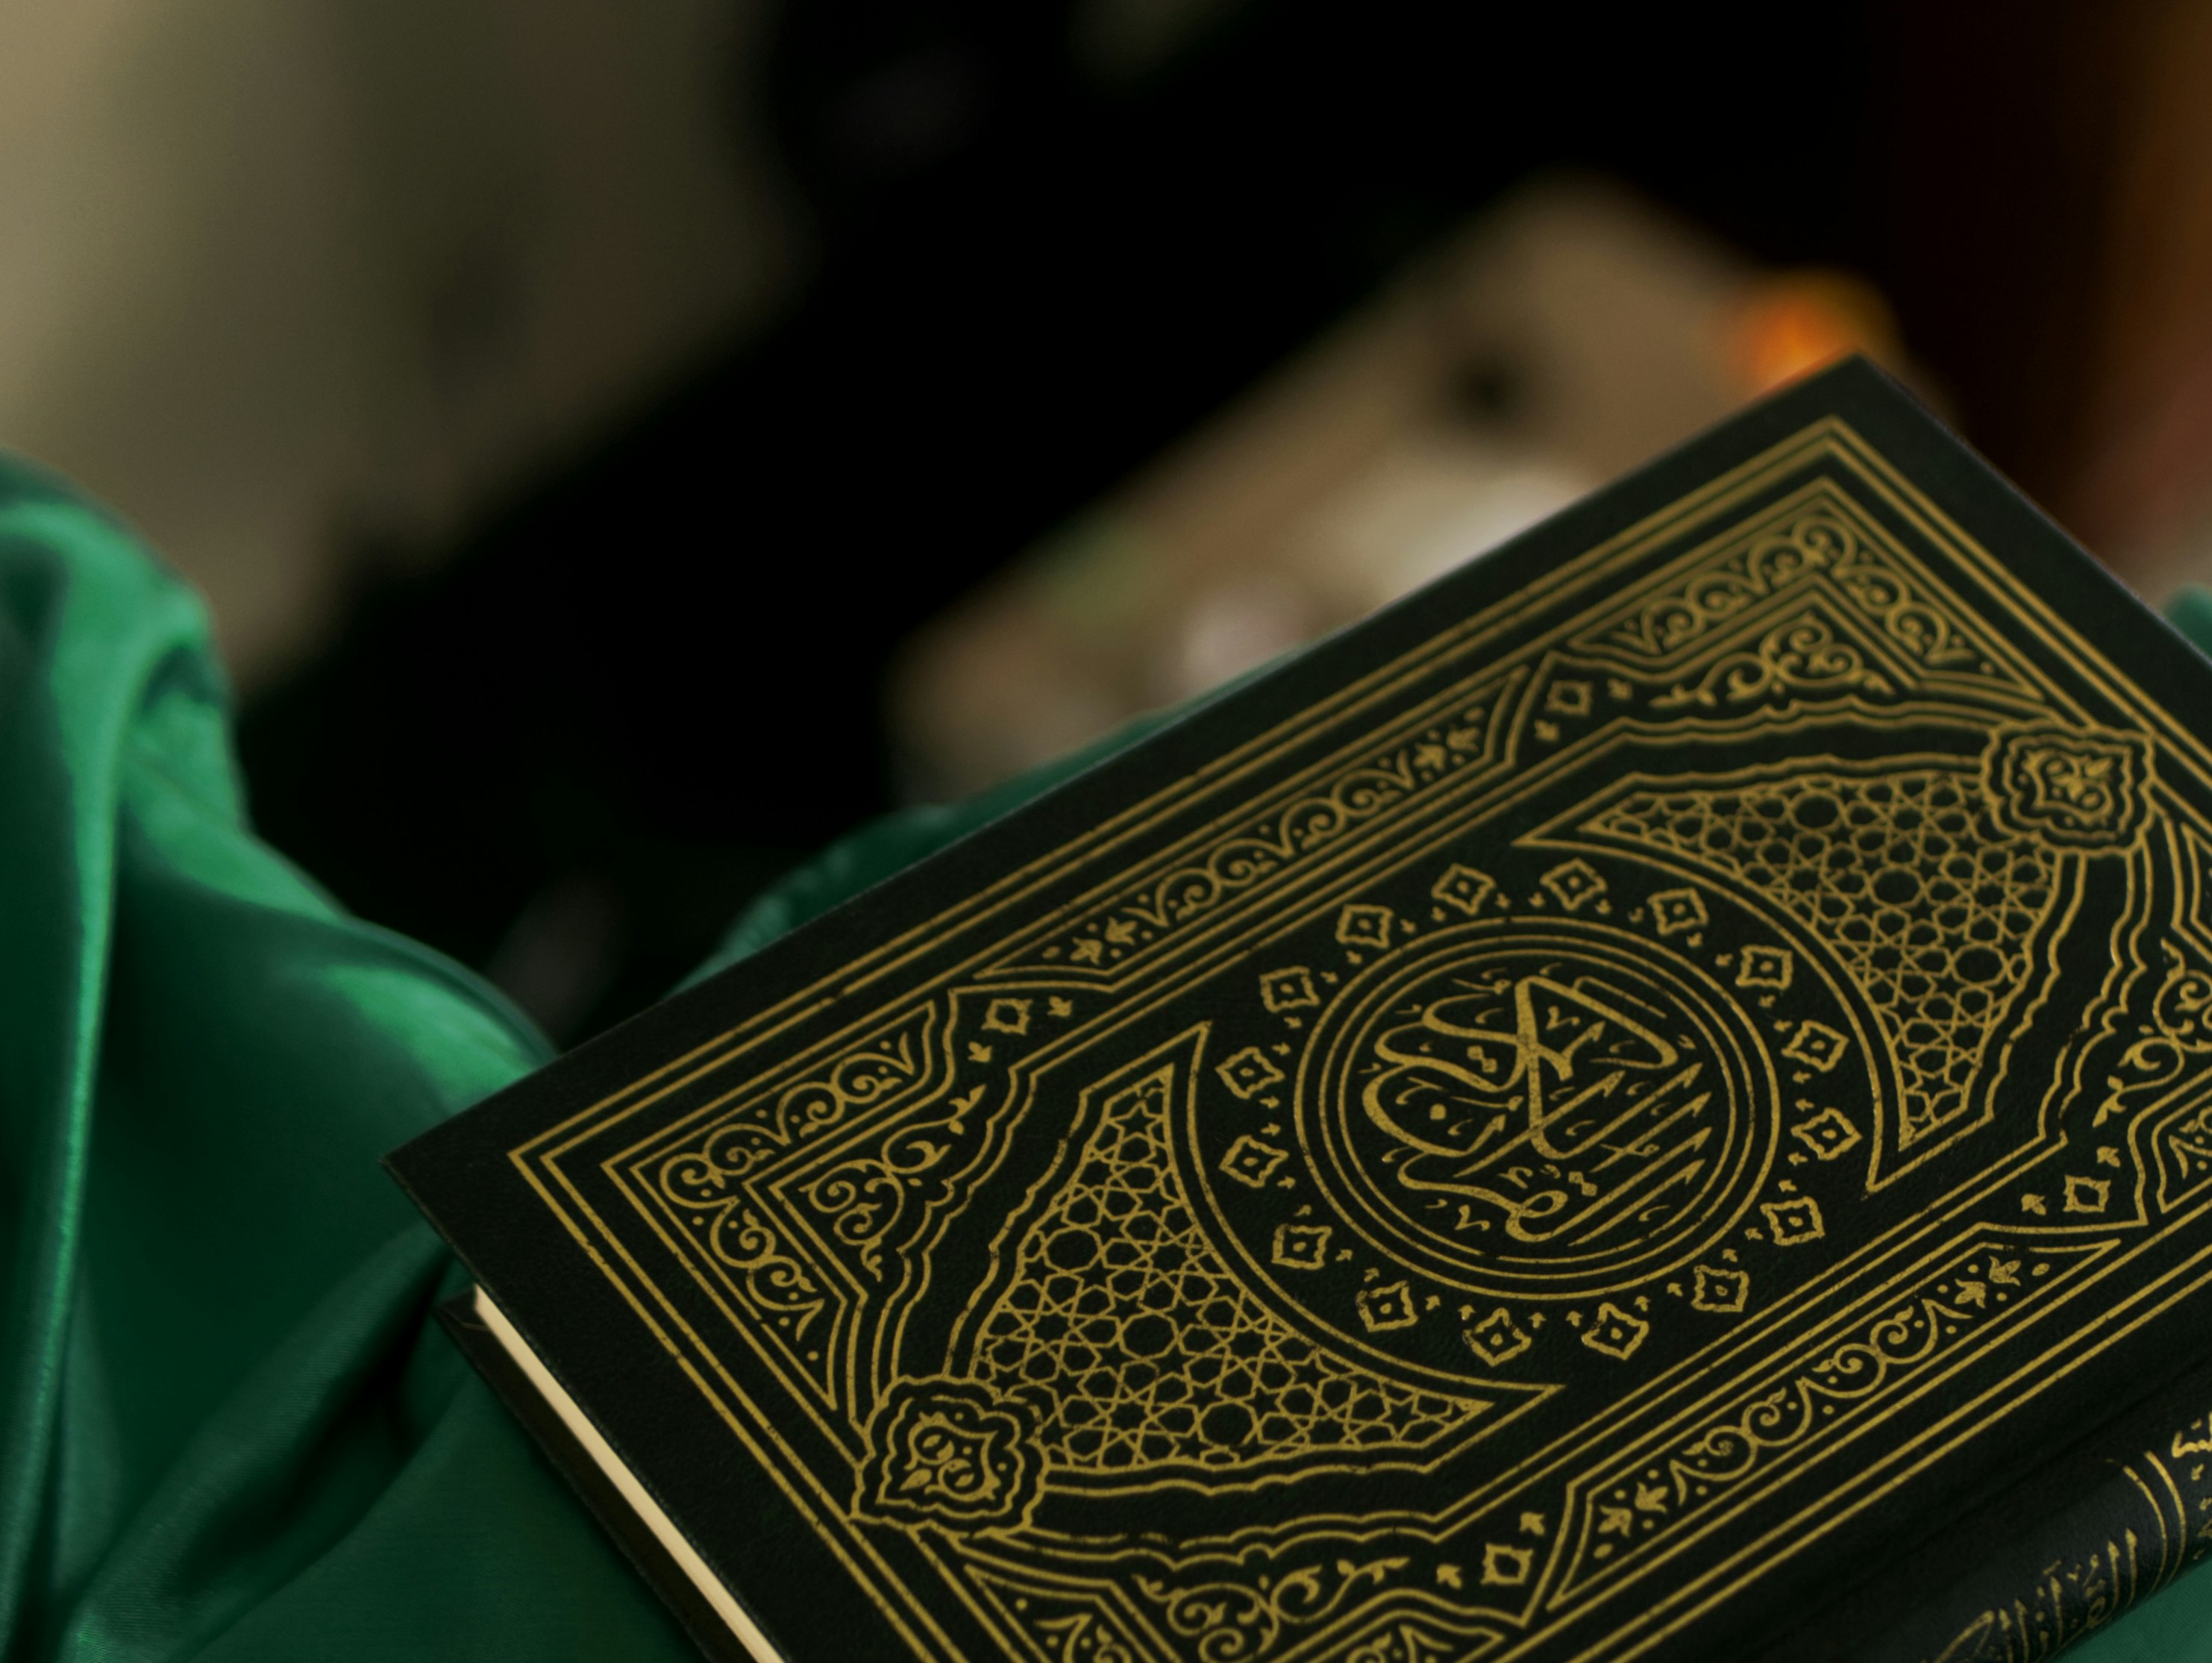 the Quran book laying on the second floor